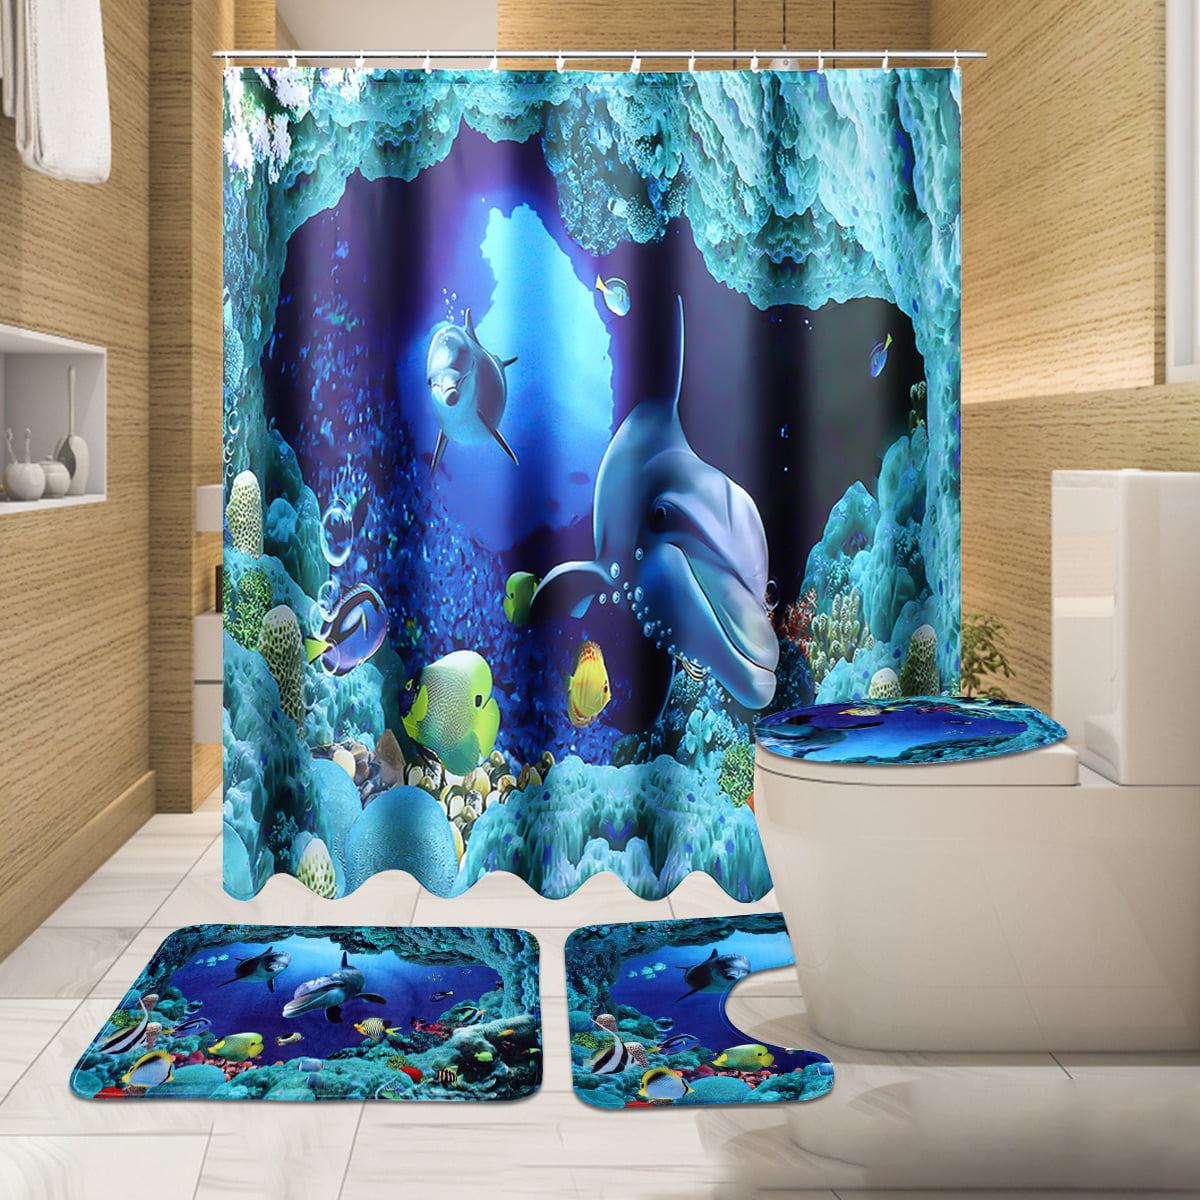 Miami Dolphins Shower Curtain Bathroom Non-slip Rugs Set Toilet Lid Cover 4PCS 